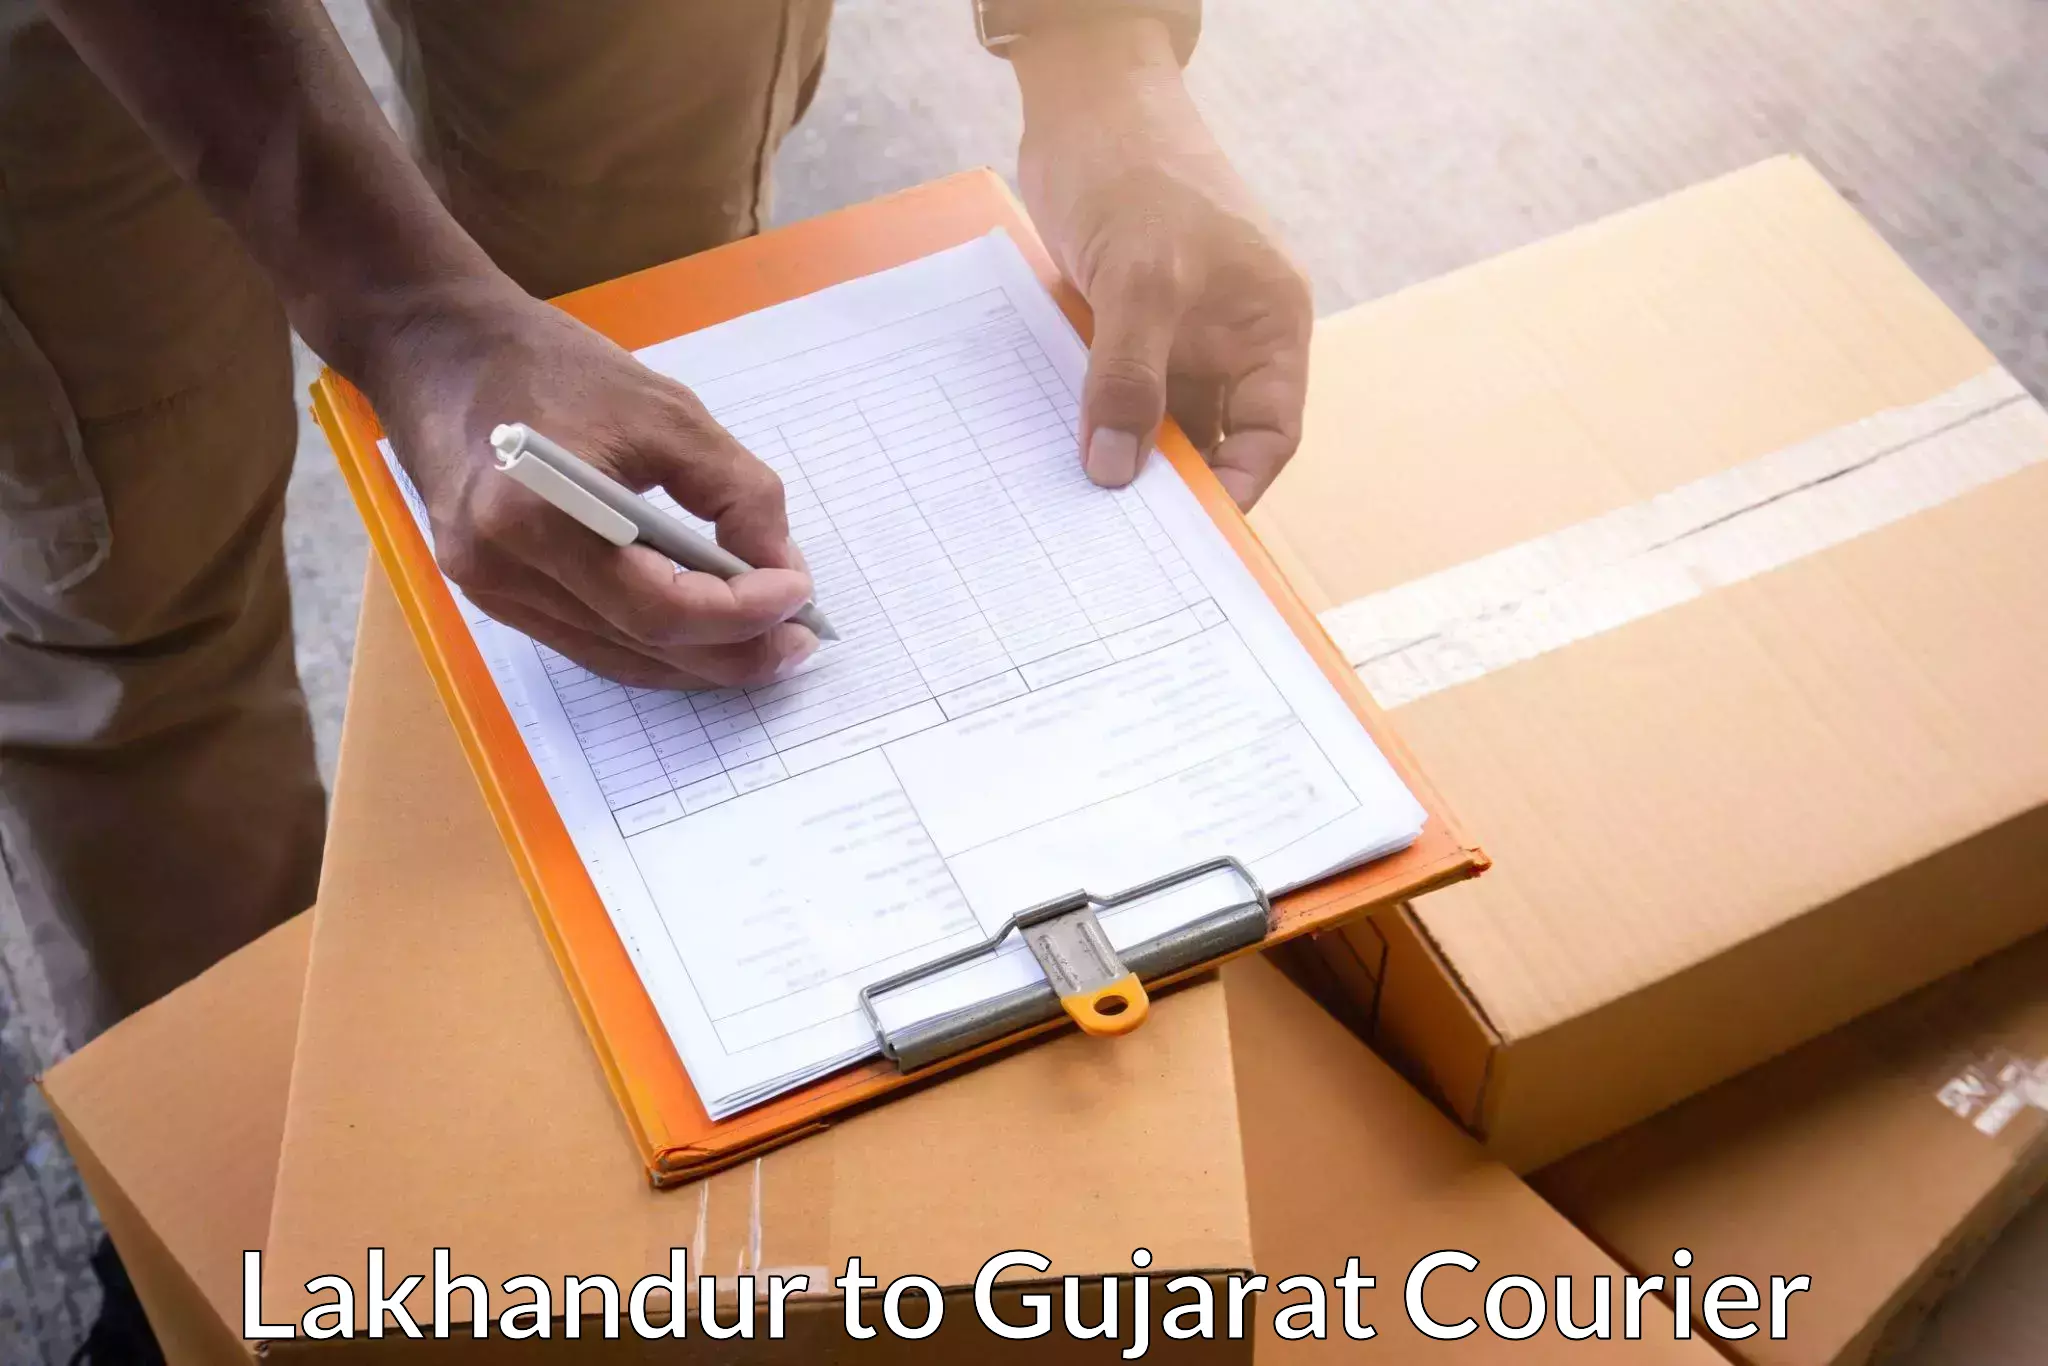 24/7 shipping services Lakhandur to Dahod